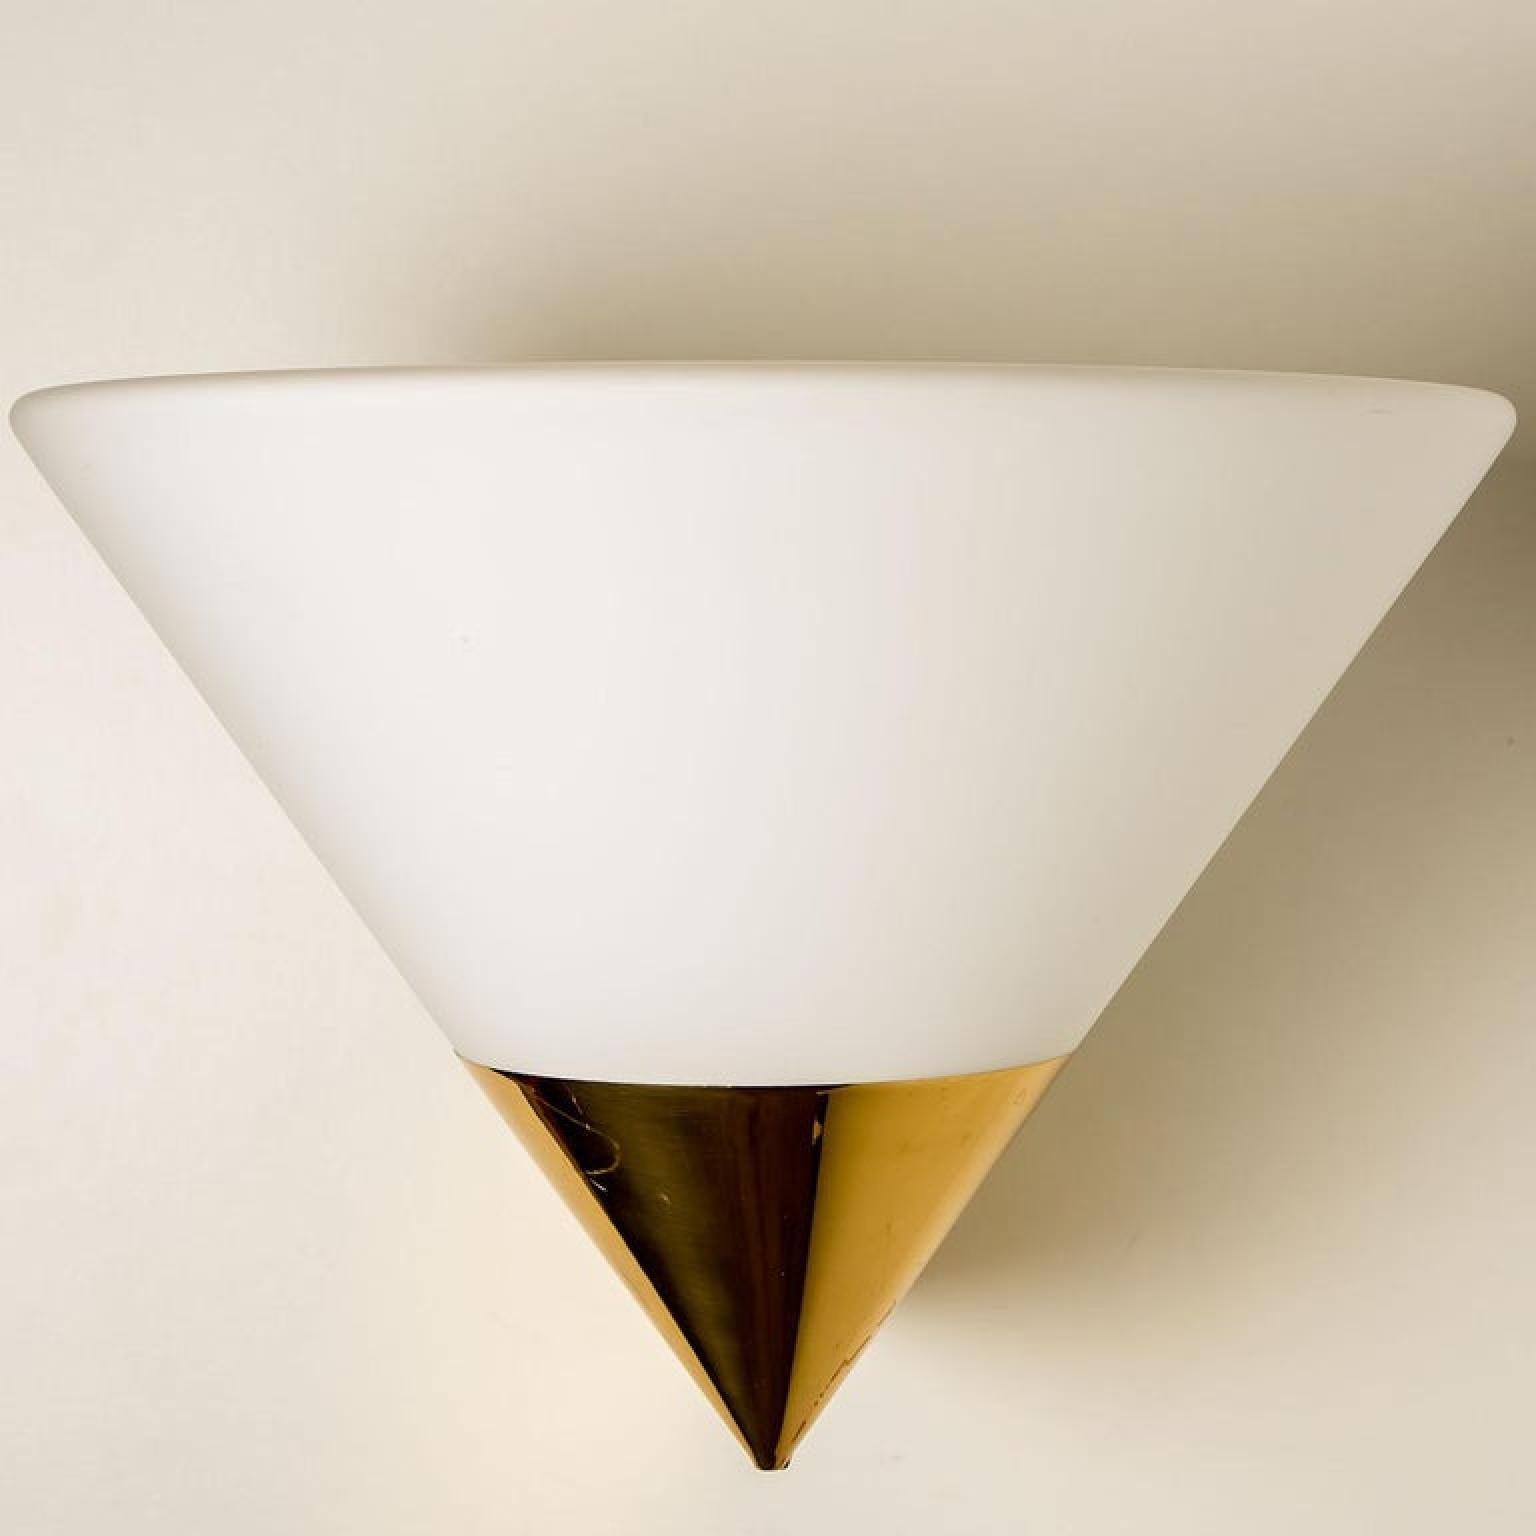 1 of the 4 Pairs Large Modern Wall Lamps by Glashütte Limburg, 1970 For Sale 1